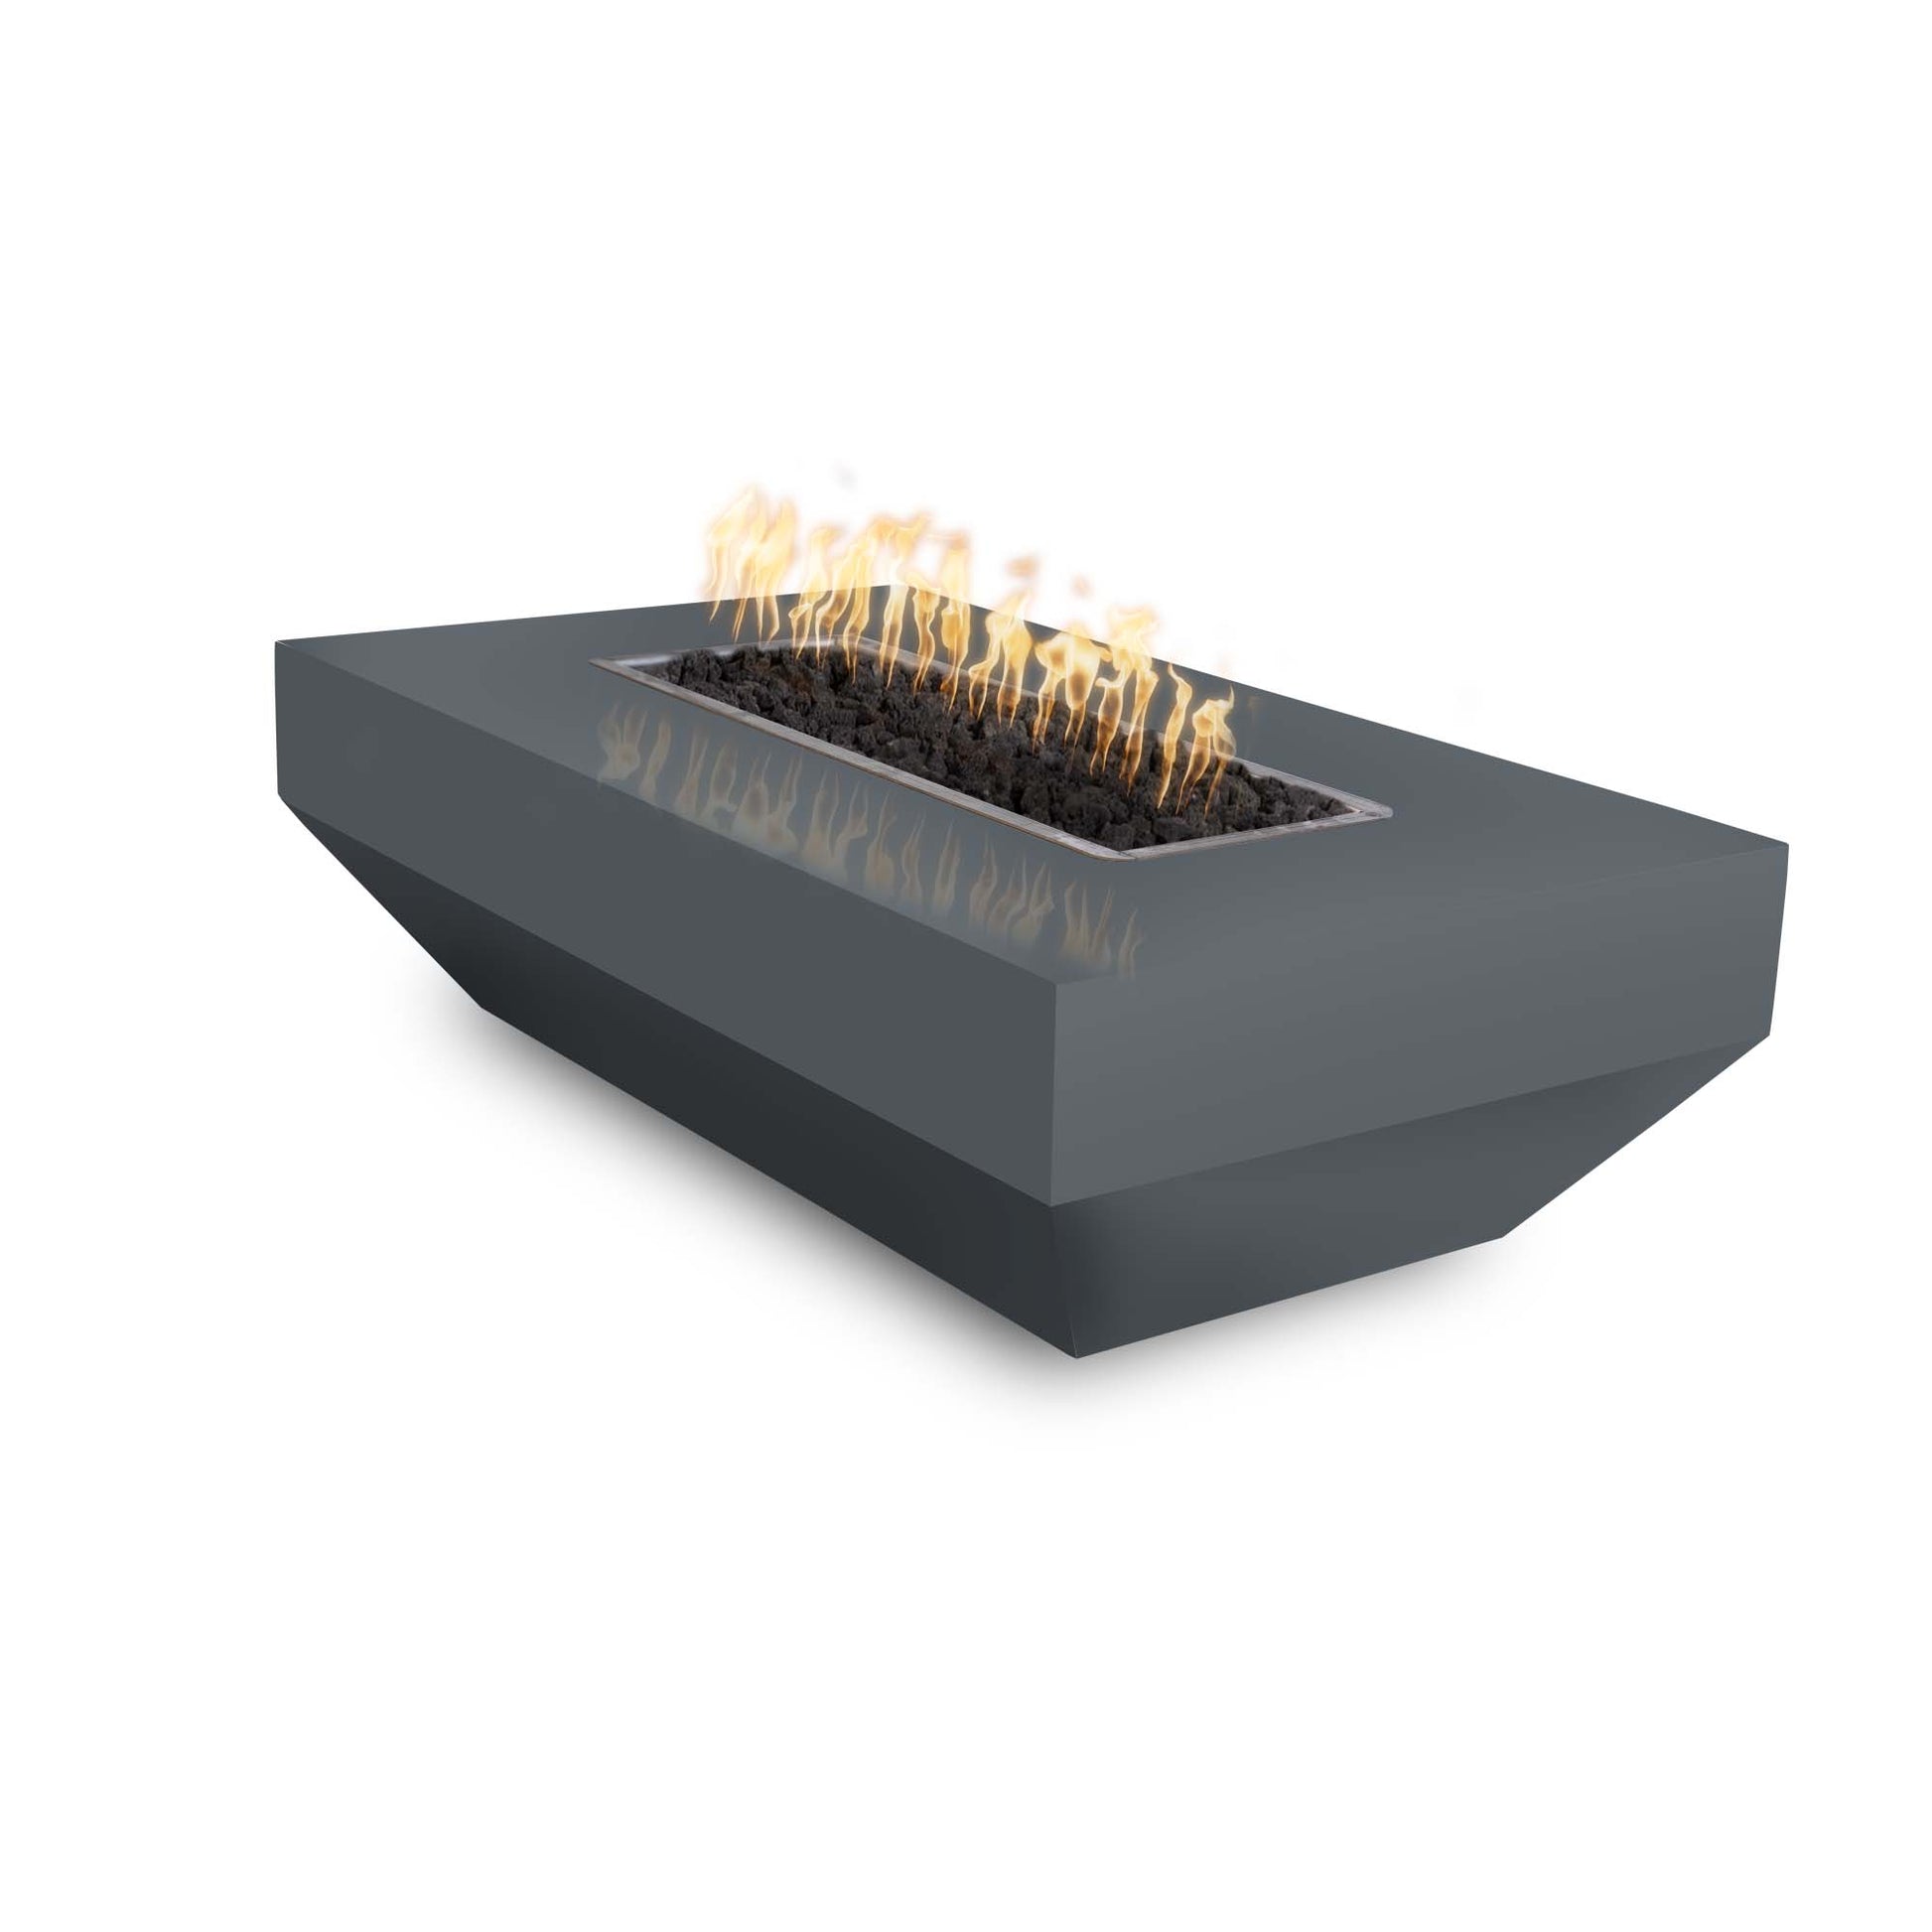 The Outdoor Plus Rectangular Moderno 84" Black Powder Coated Metal Natural Gas Fire Pit with 110V Electronic Ignition